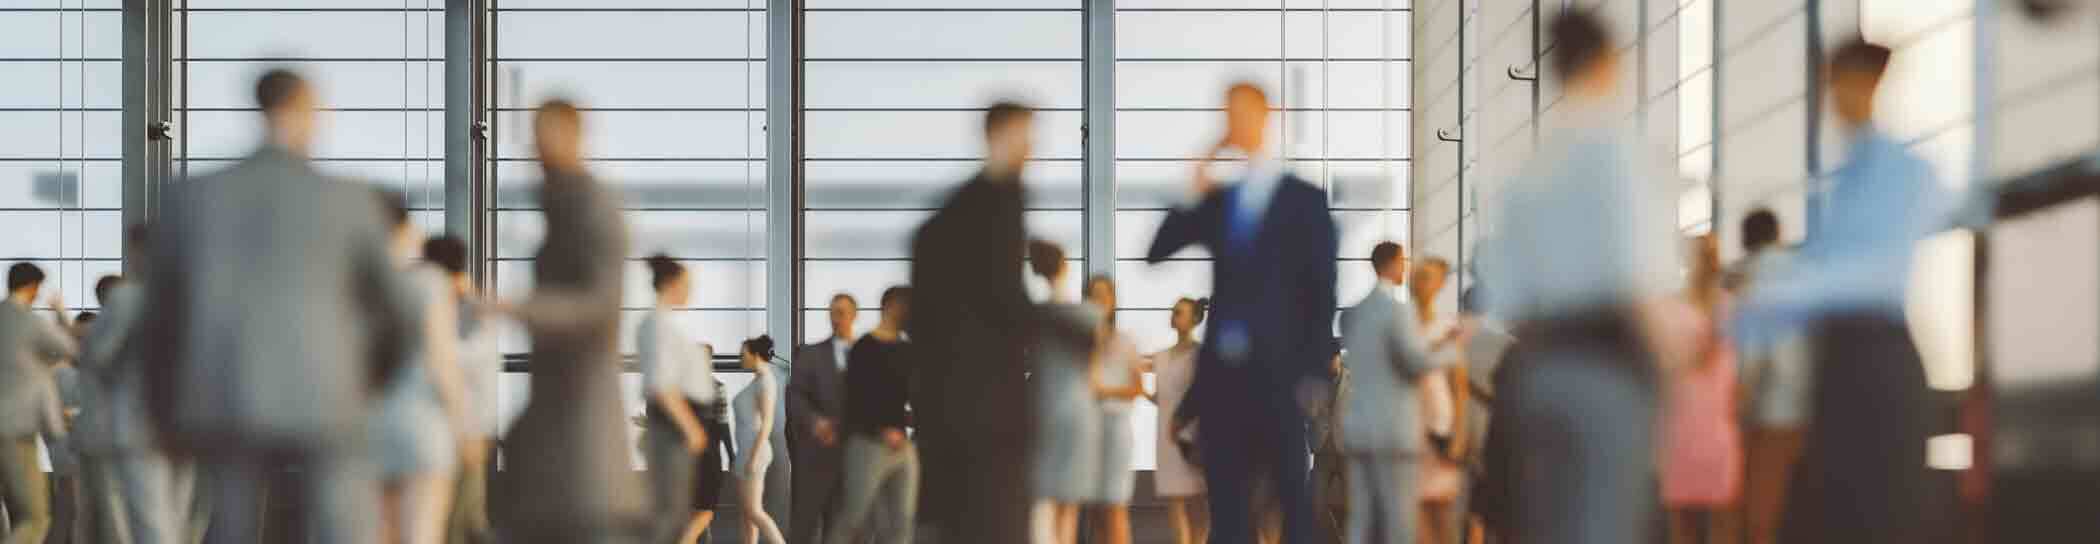 A blurred image of a busy indoor gathering with numerous people dressed in business attire, engaging in conversations and networking. The background features large windows allowing natural light to fill the space, creating a modern and professional enviro